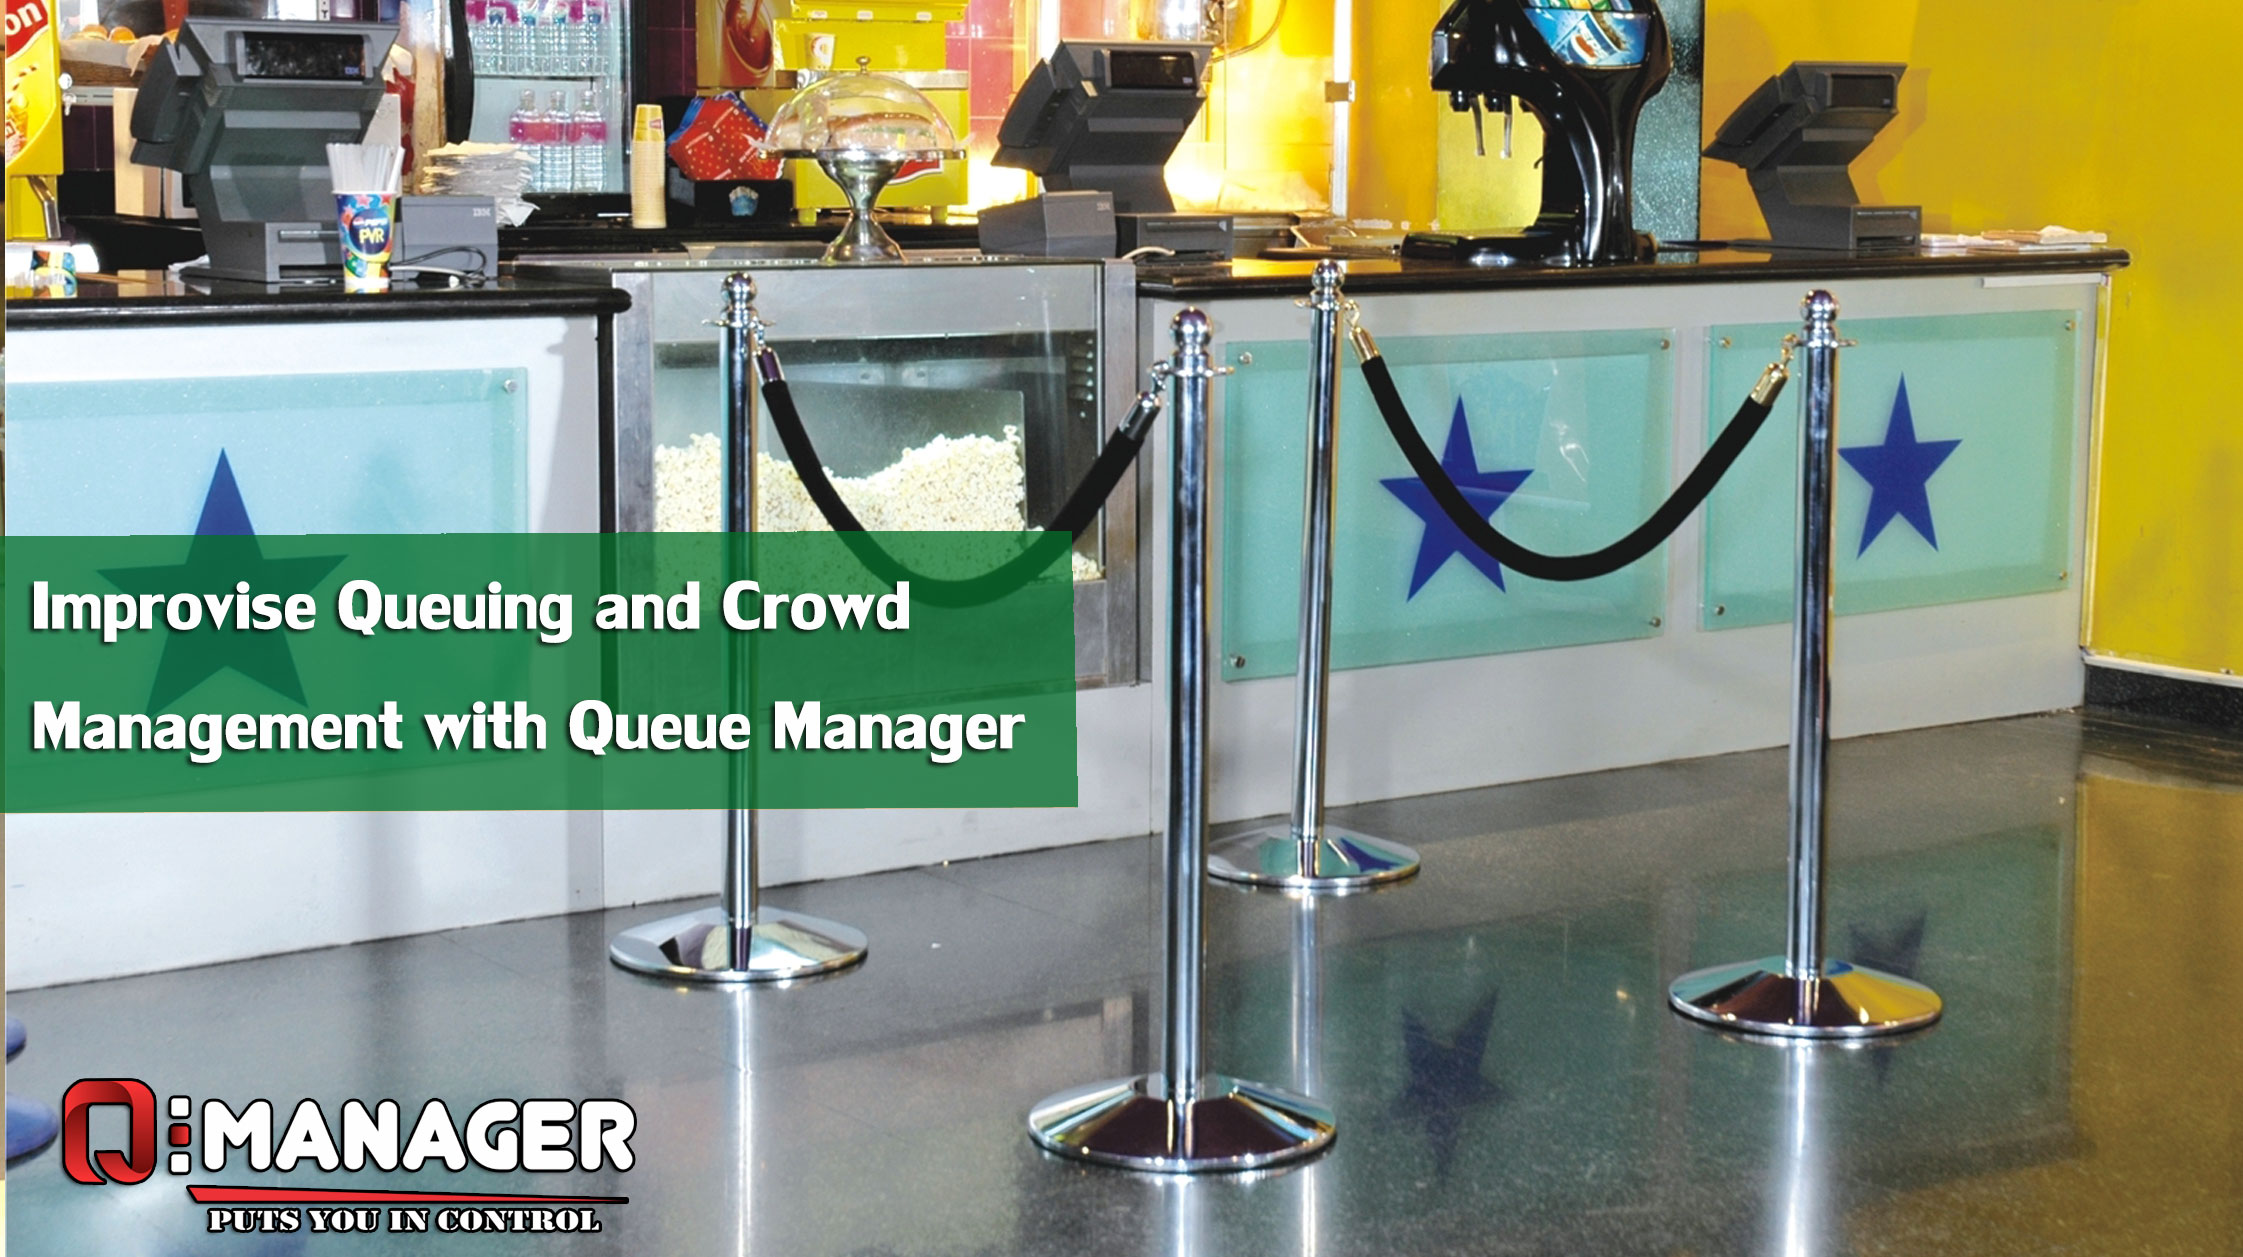 Improvise Queuing and Crowd Management with Queue Manager